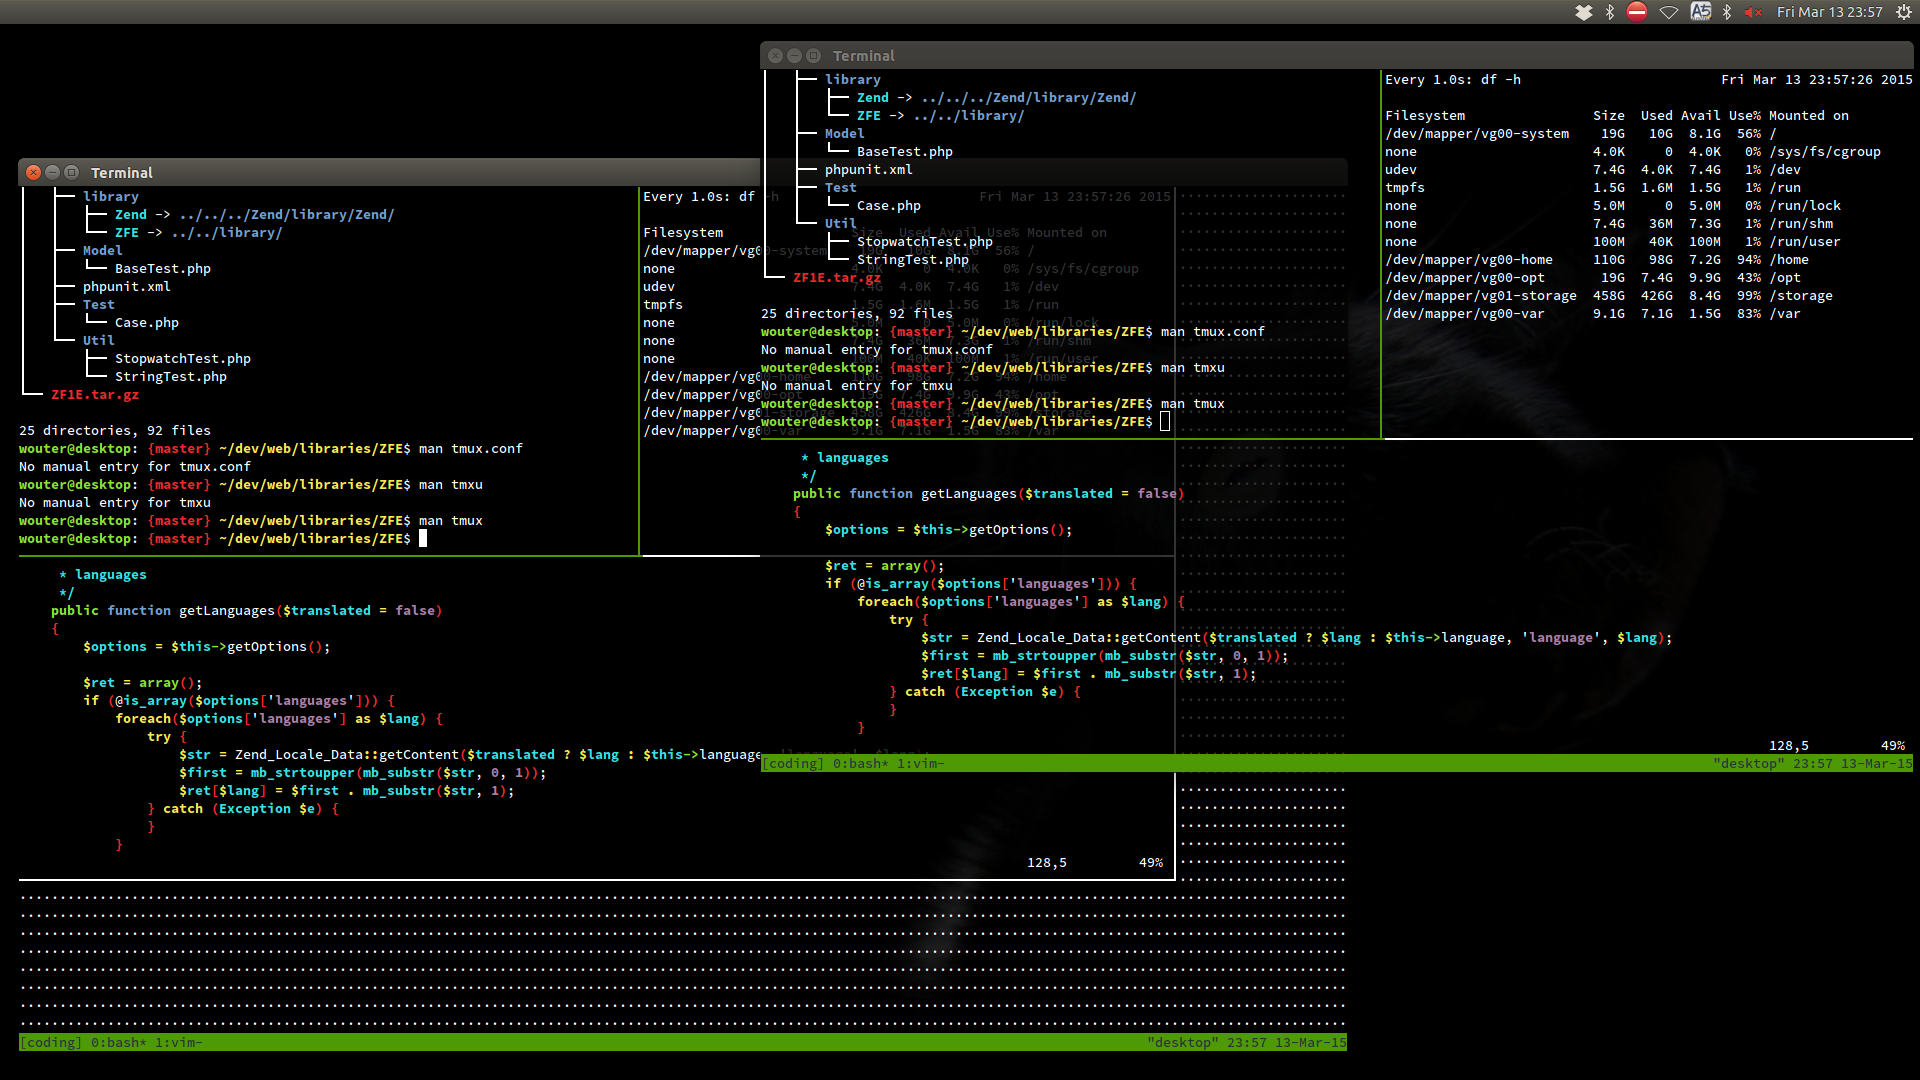 You can have the same tmux session in multiple terminals. Very useful for pair programming or mentoring.